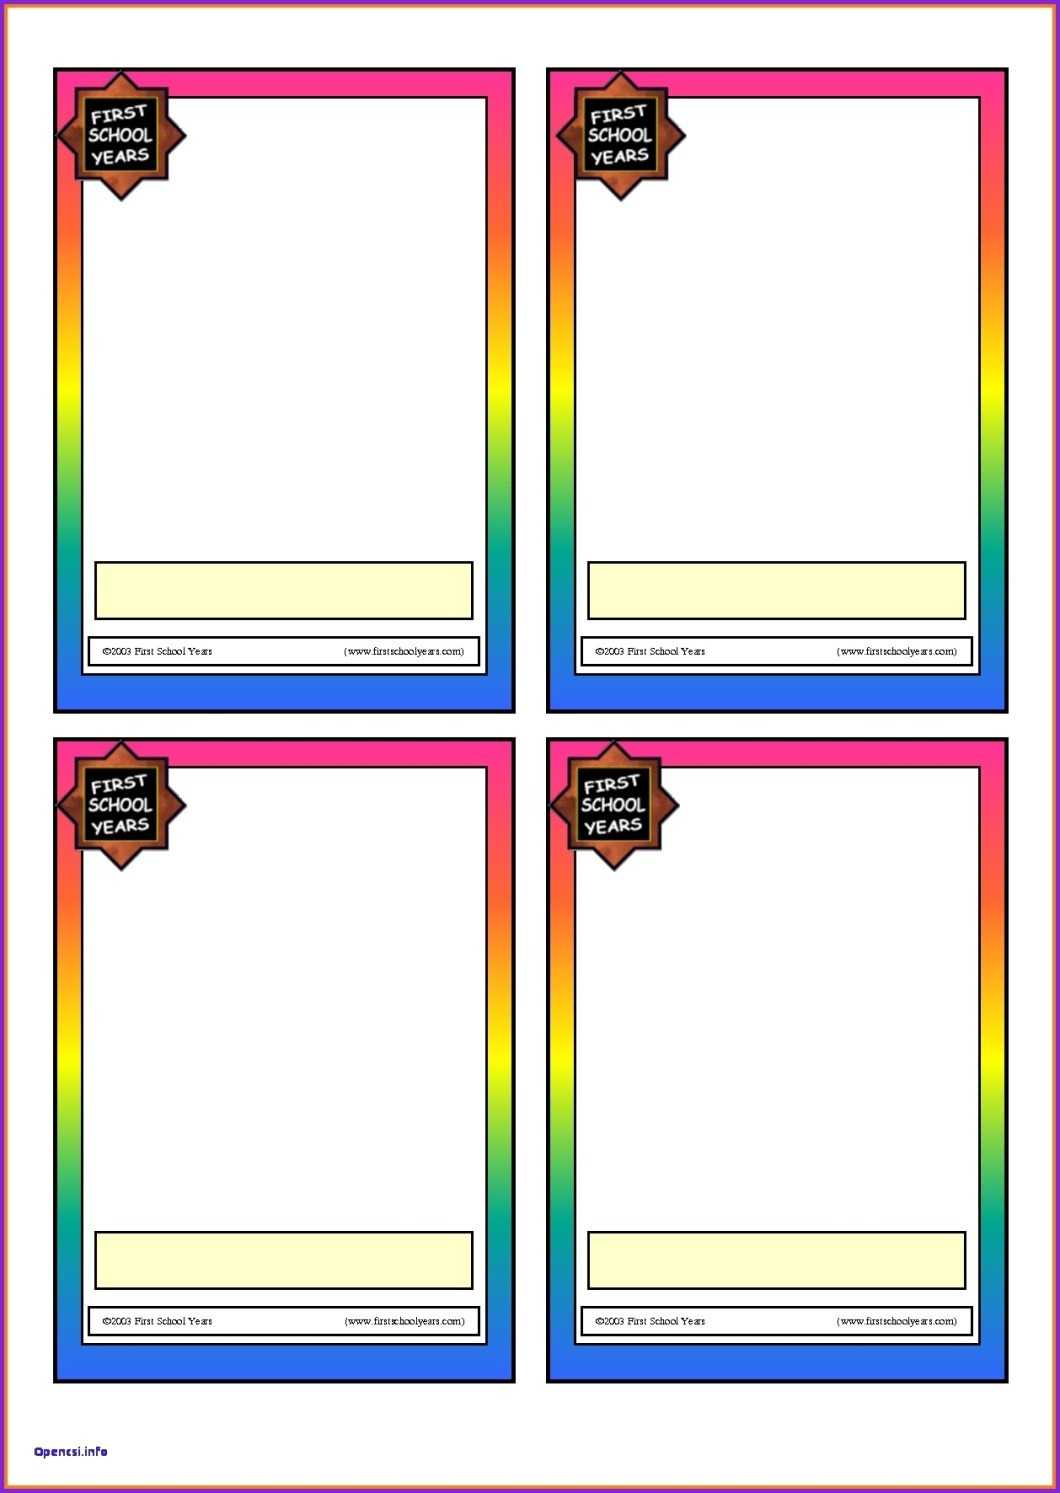 Printable Blank Flash Cards Cardjdi Org Flashcards In Free Printable Flash Cards Template